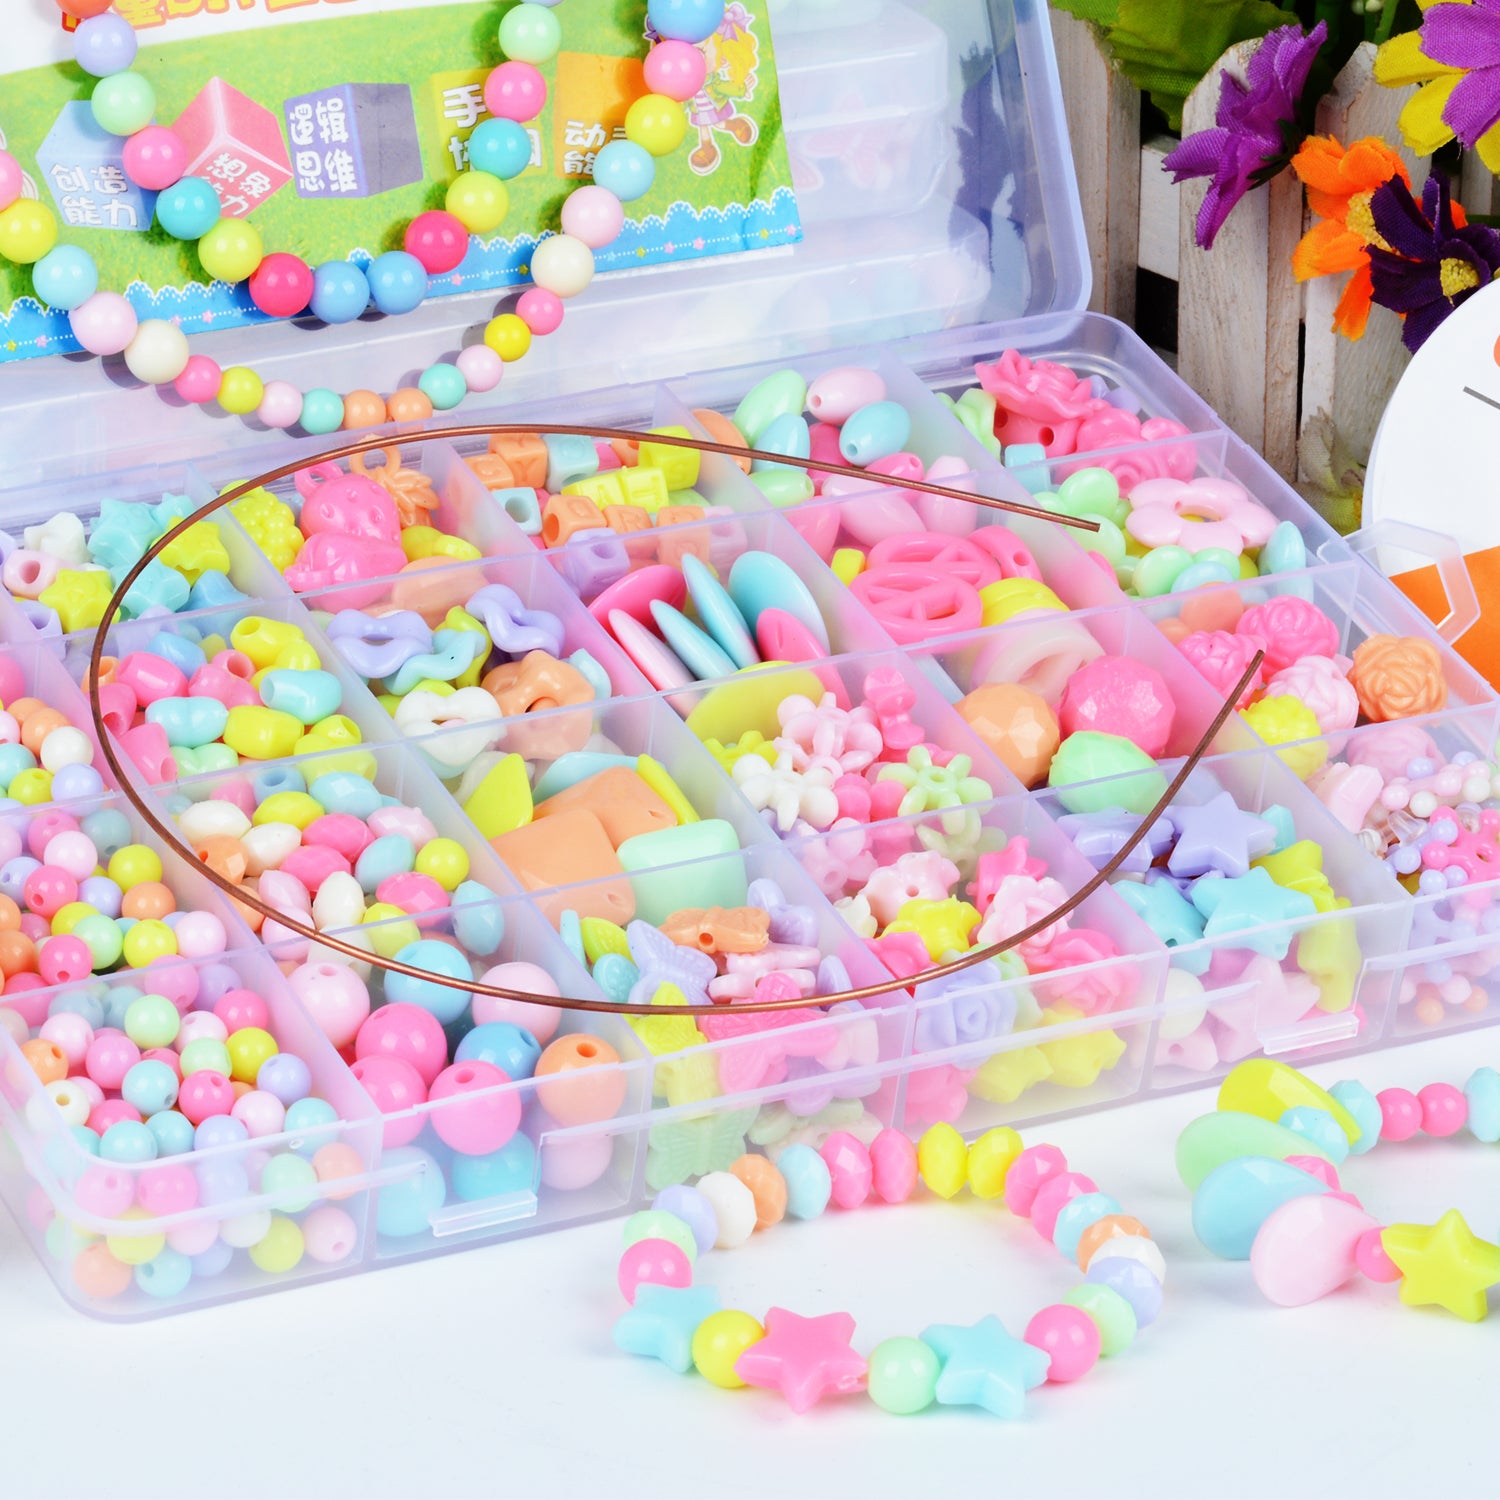 DIY Bead Kit 24 Grids Plastic Beads Set for Kids Crafts and Jewelry Making